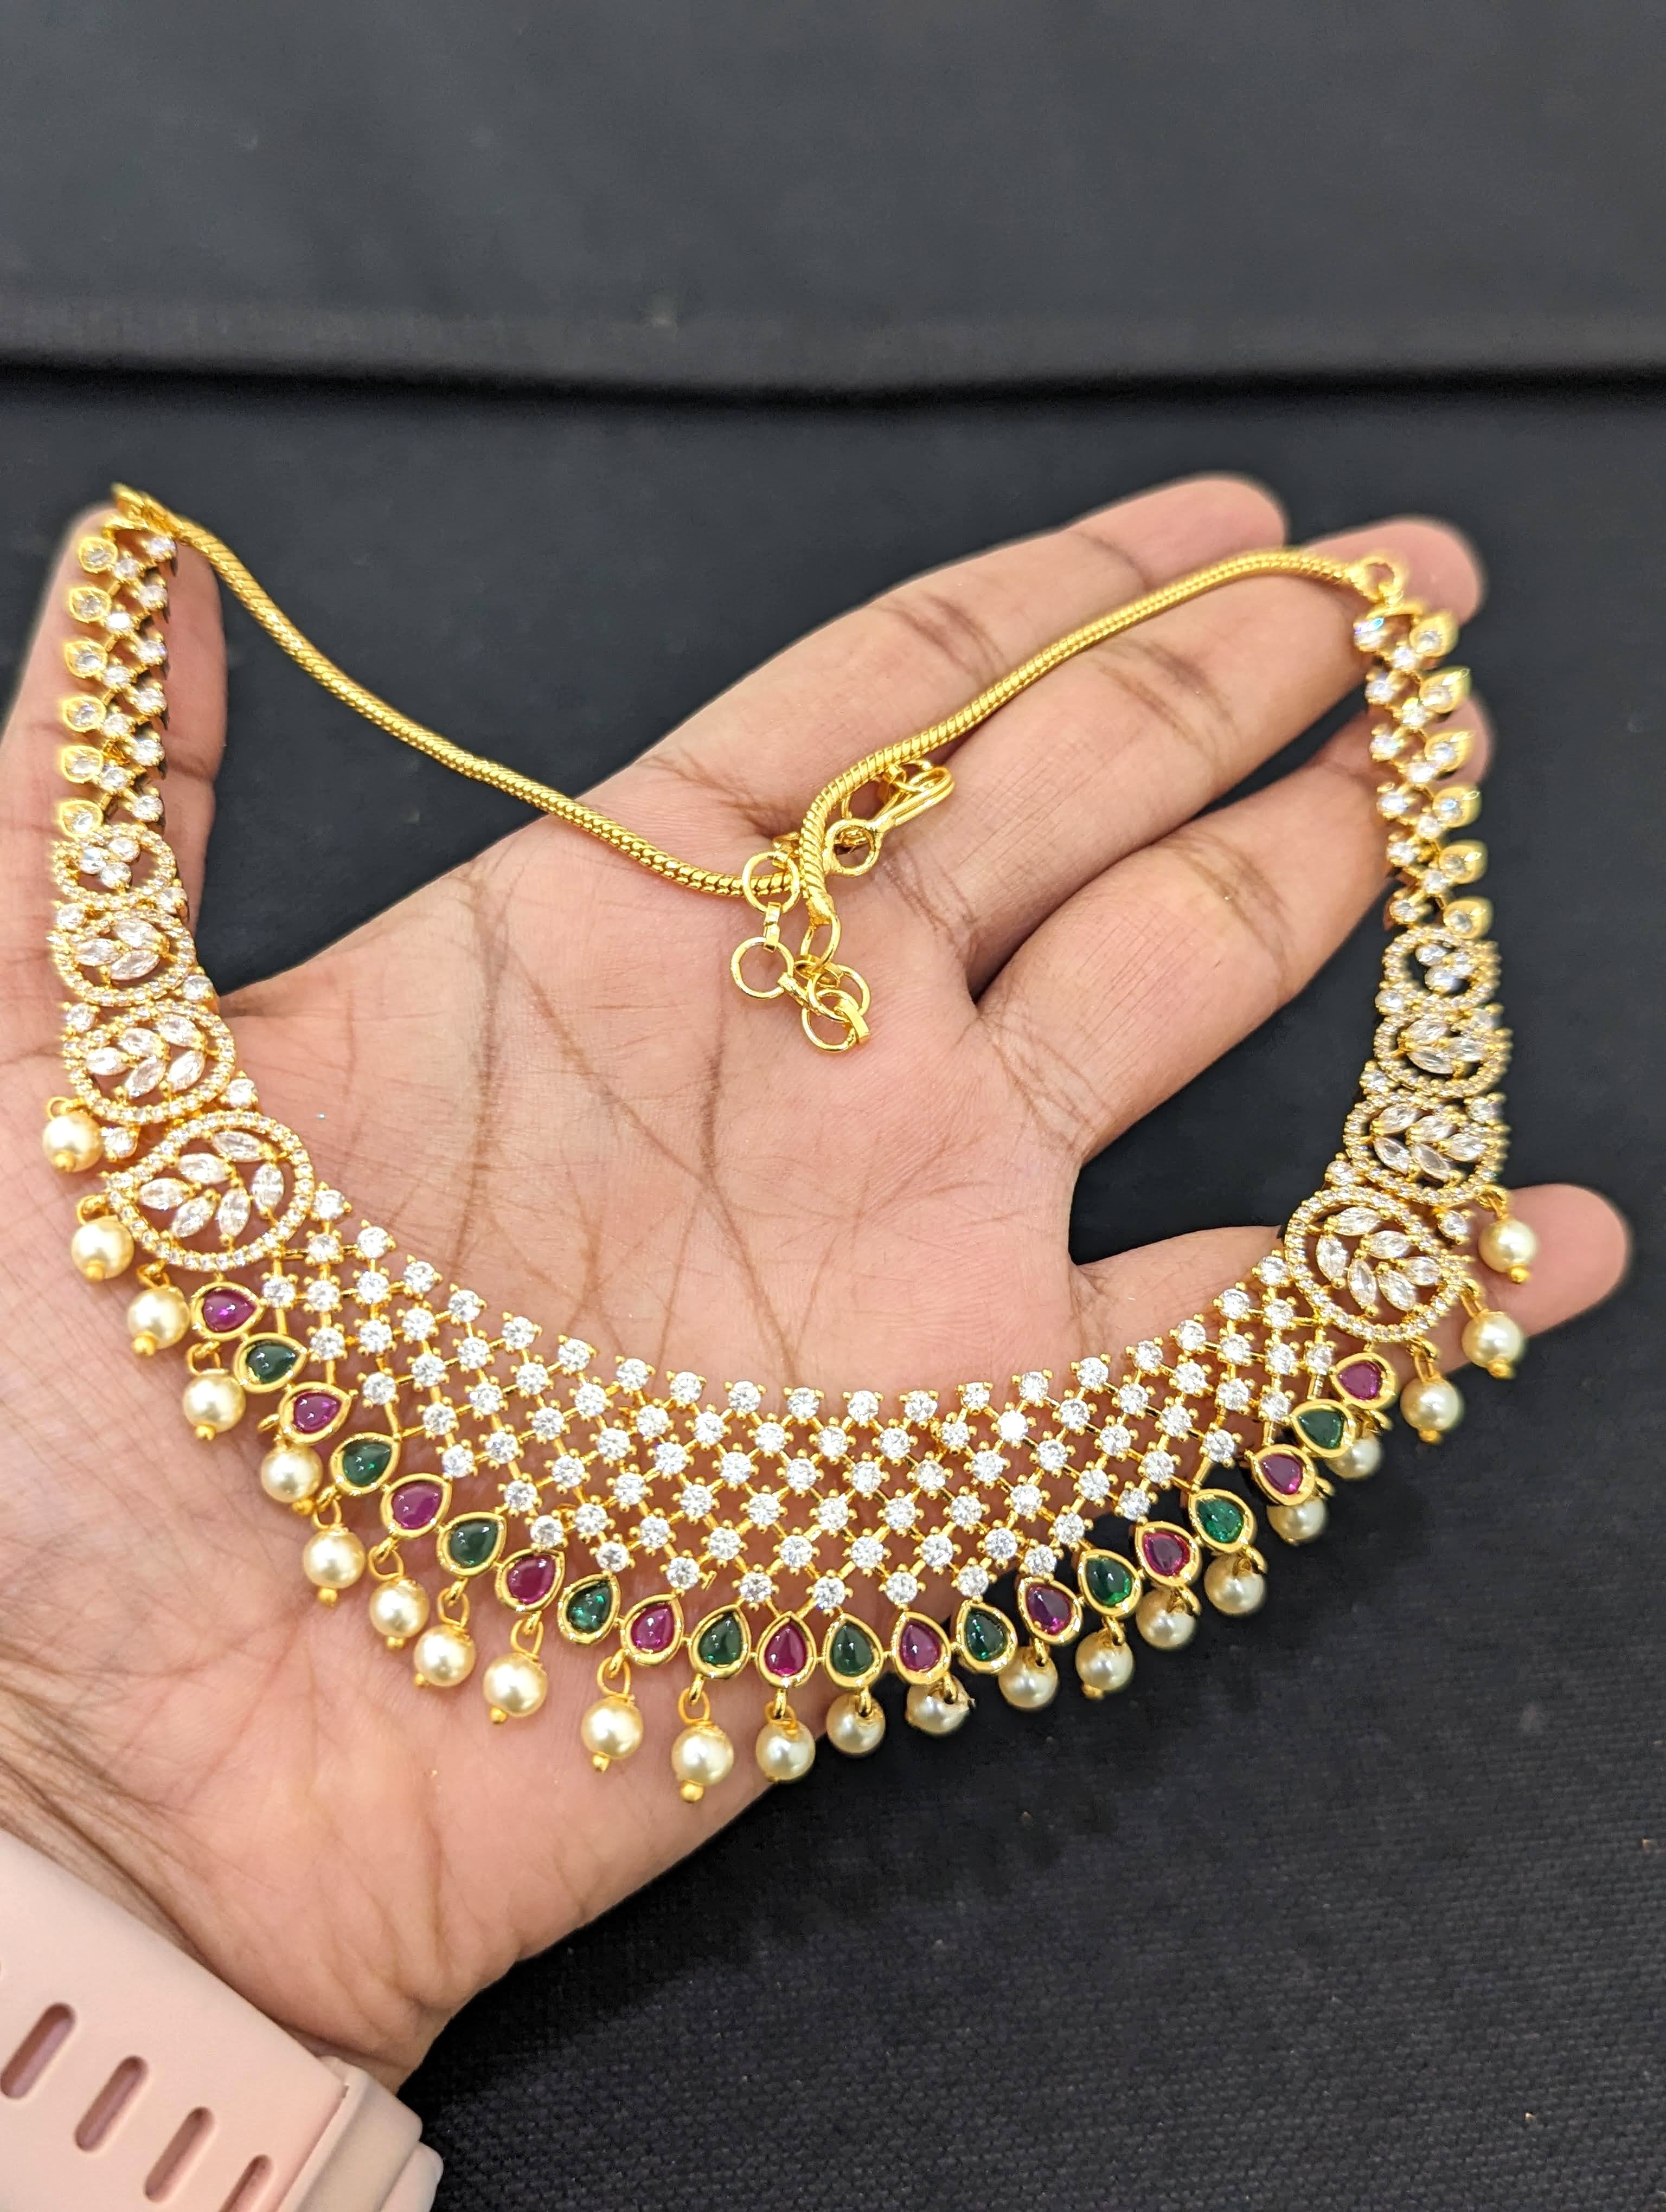 1 Gram Fancy Gold Necklace Set in Ahmedabad at best price by Astmangal  Chains Pvt Ltd - Justdial